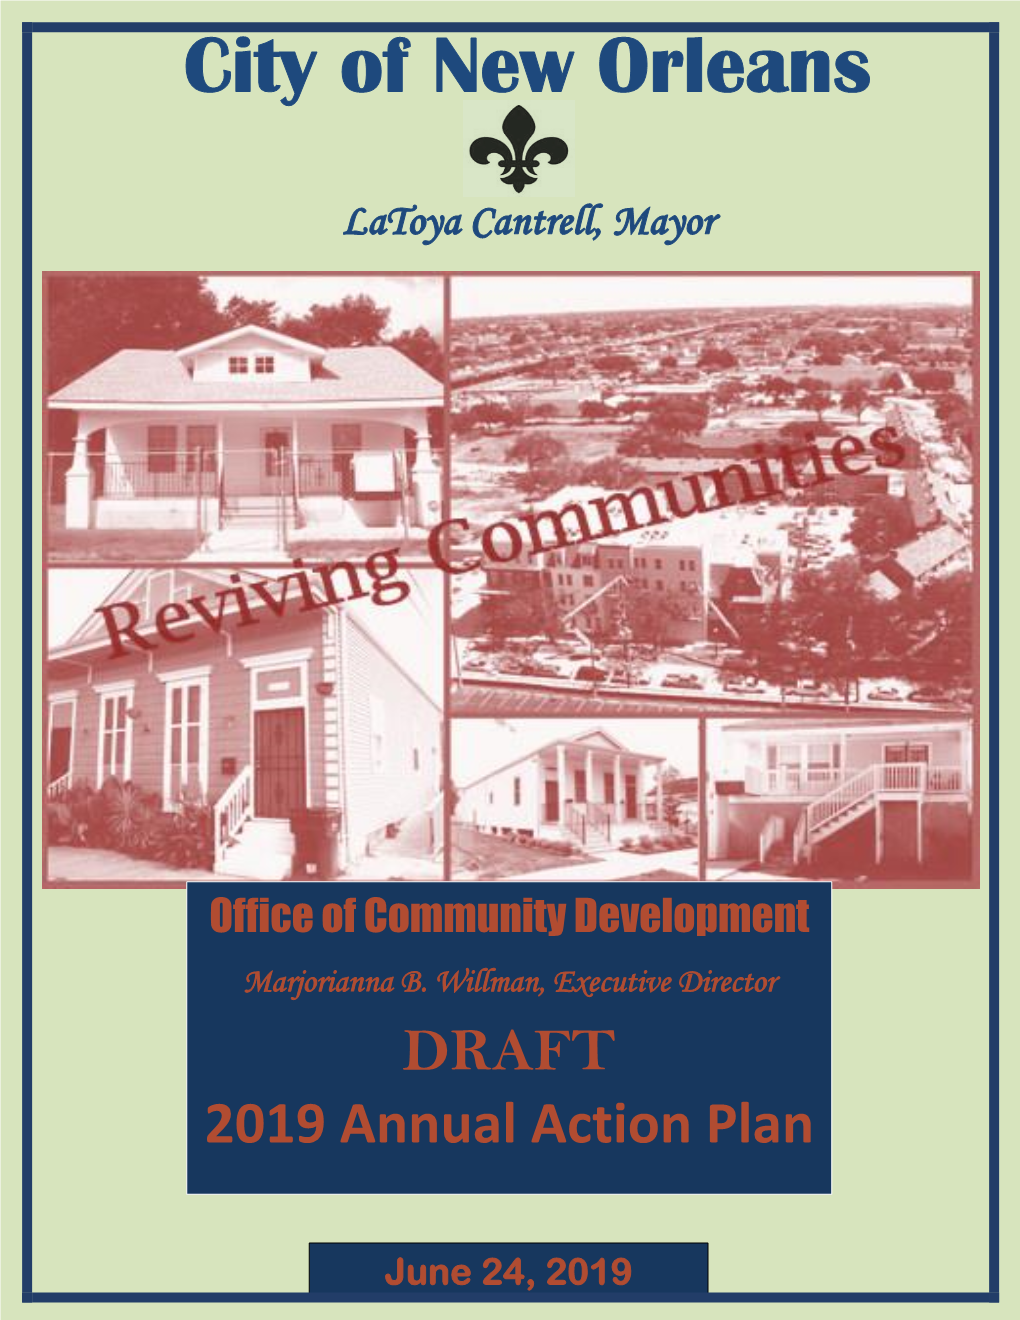 DRAFT 2019 Annual Action Plan